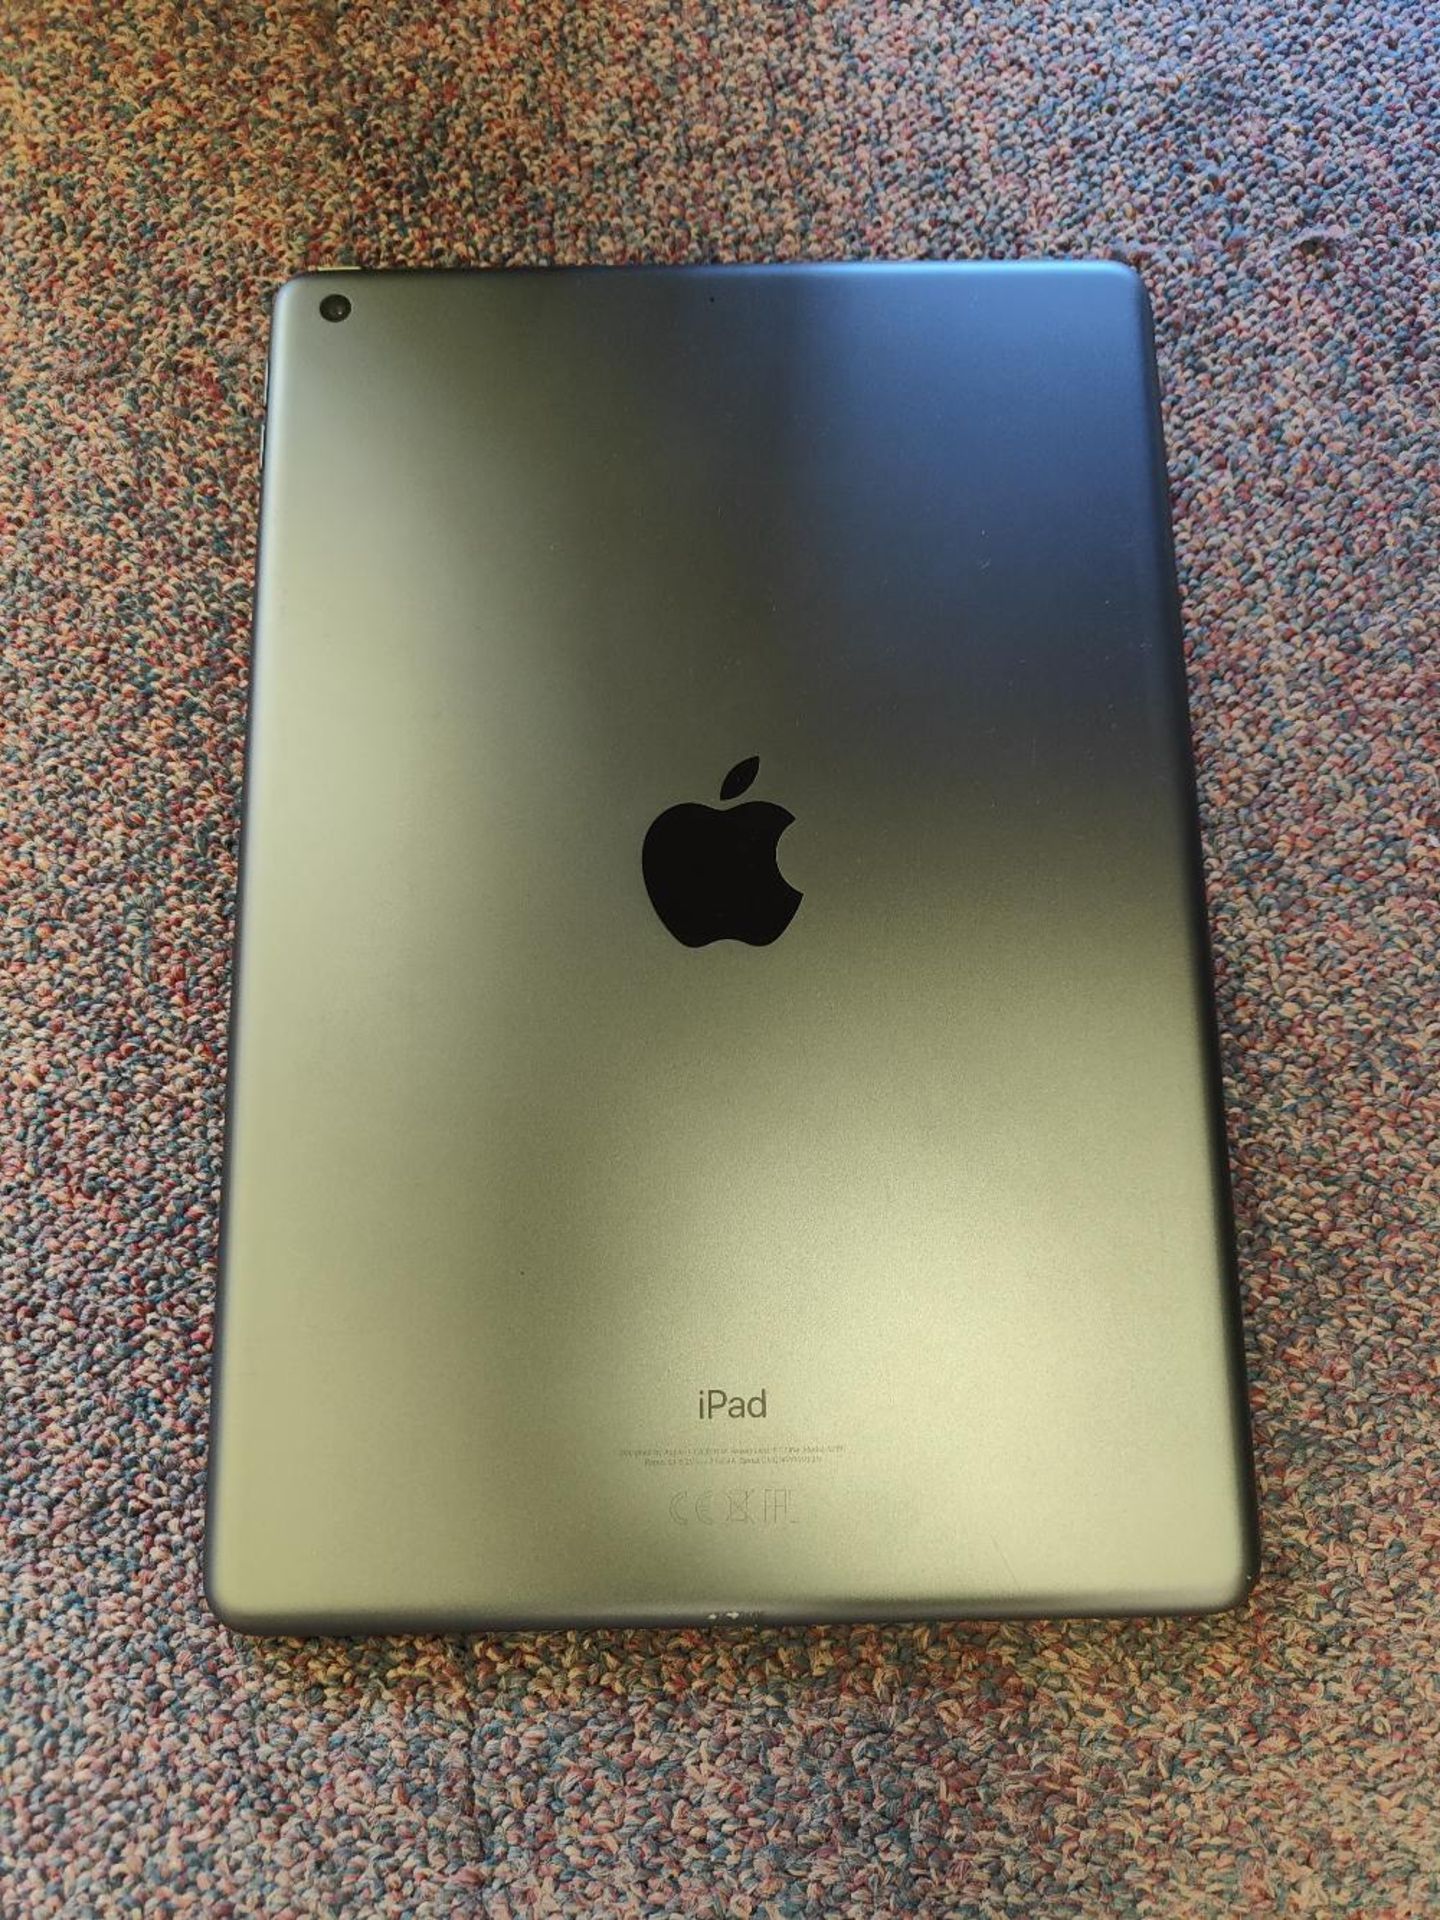 Apple iPad 7th Gen 32GB Space Grey - WiFi Only - Image 3 of 4